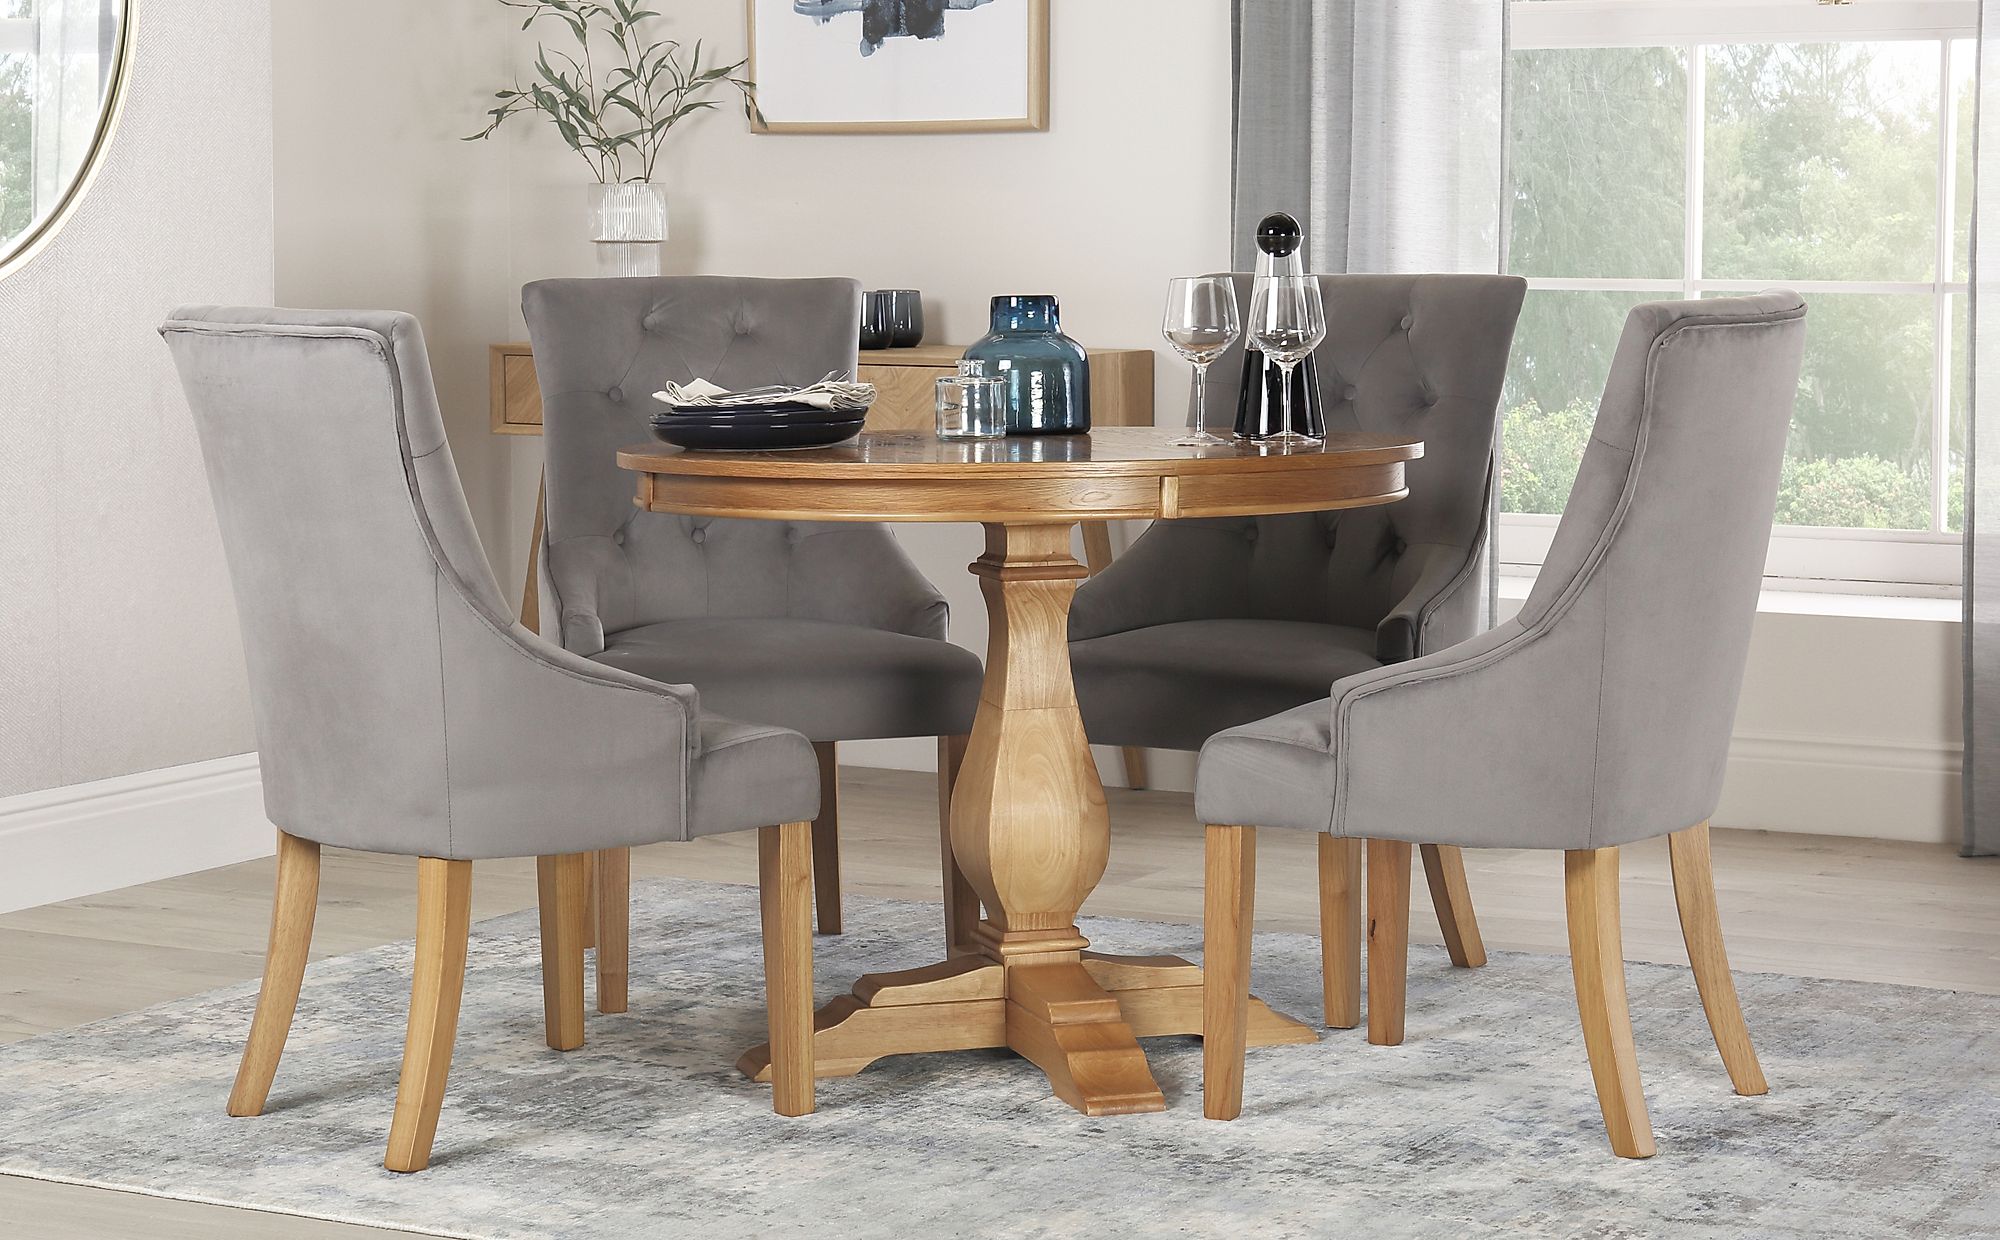 Cavendish Round Oak Dining Table with 4 Duke Grey Velvet Chairs